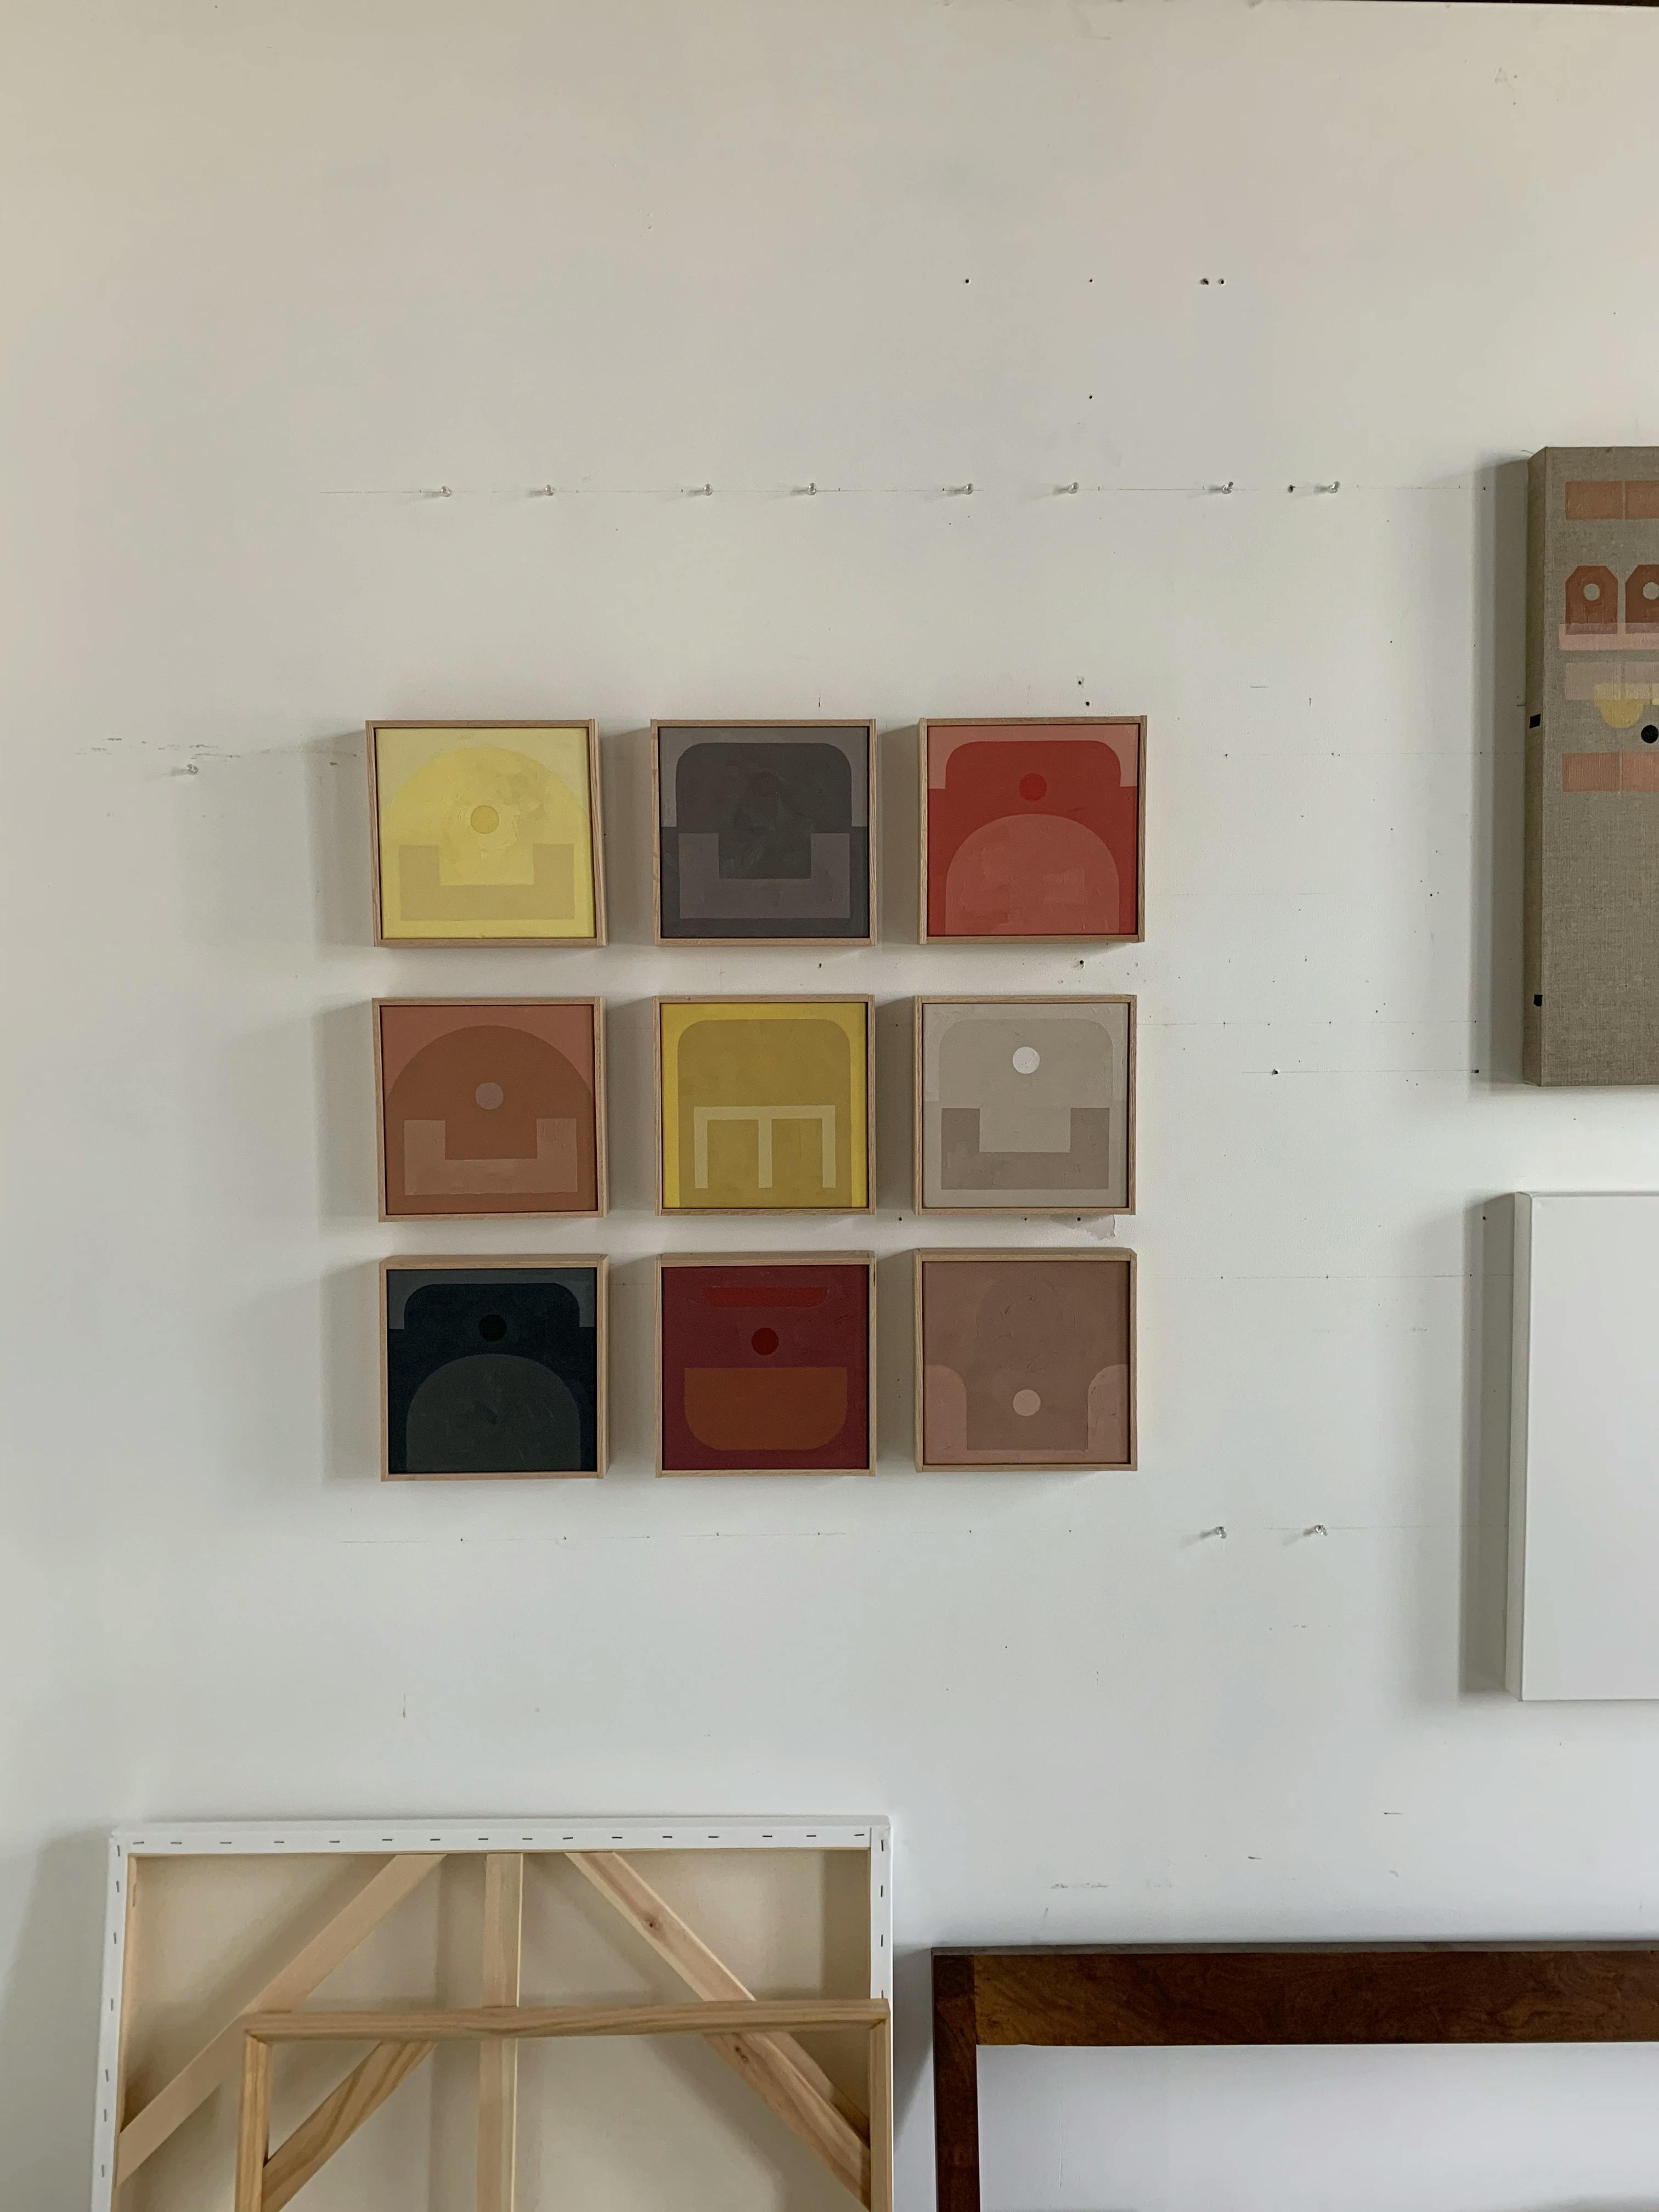 A grid of nine, small monochrome paintings by artist Carla Weeks installed on a white wall in her studio.